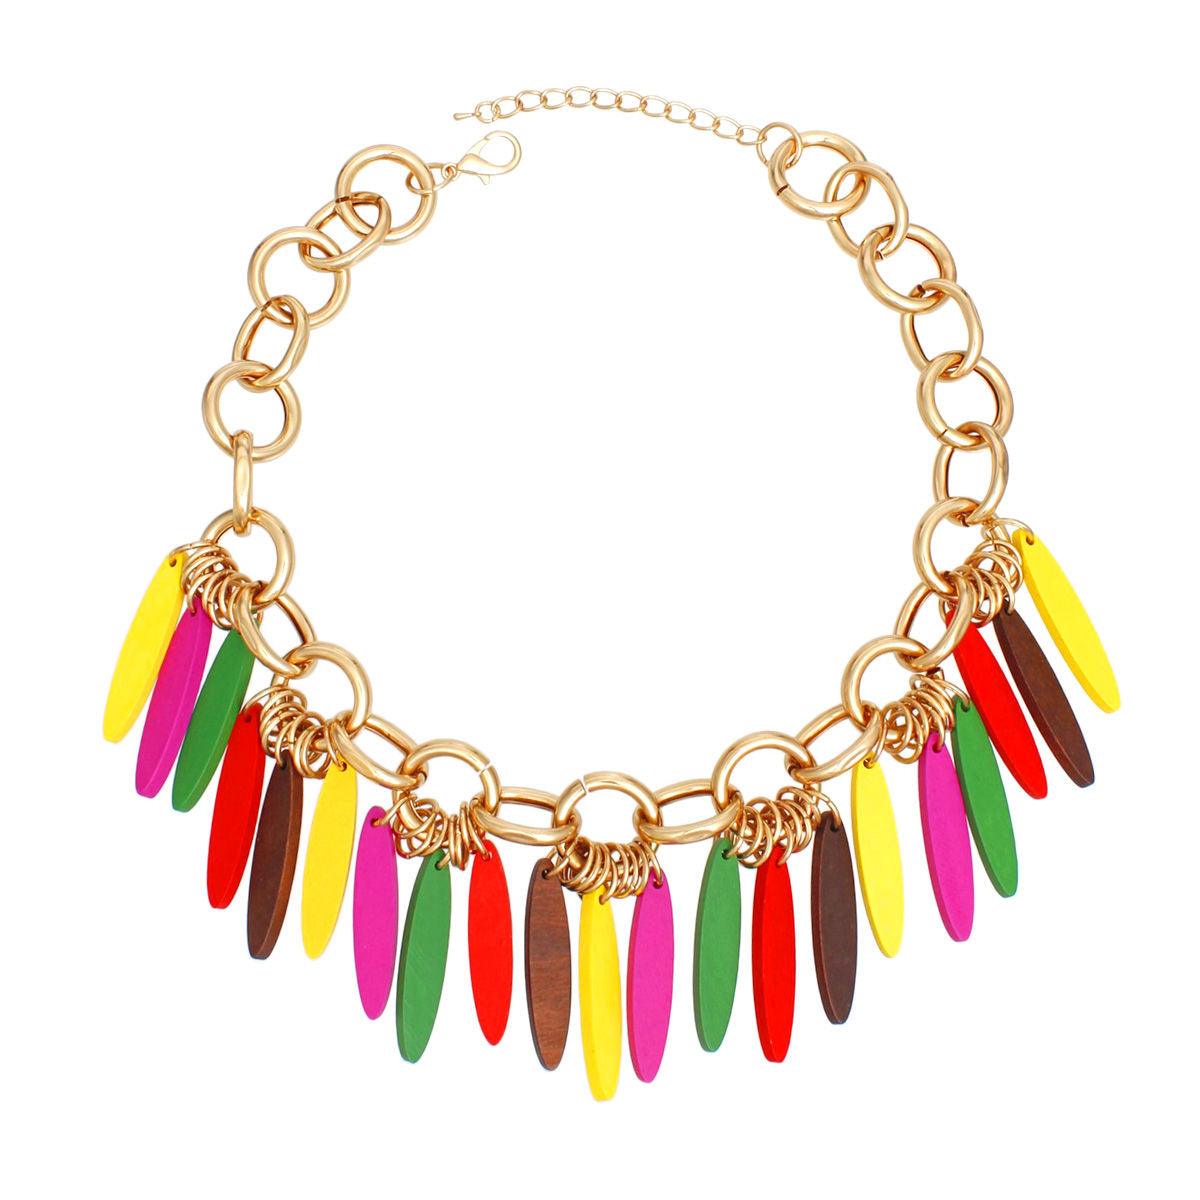 Gold Link Chain Multicolor Drops Detail Statement Necklace - Fashion Jewelry to Shop Now!